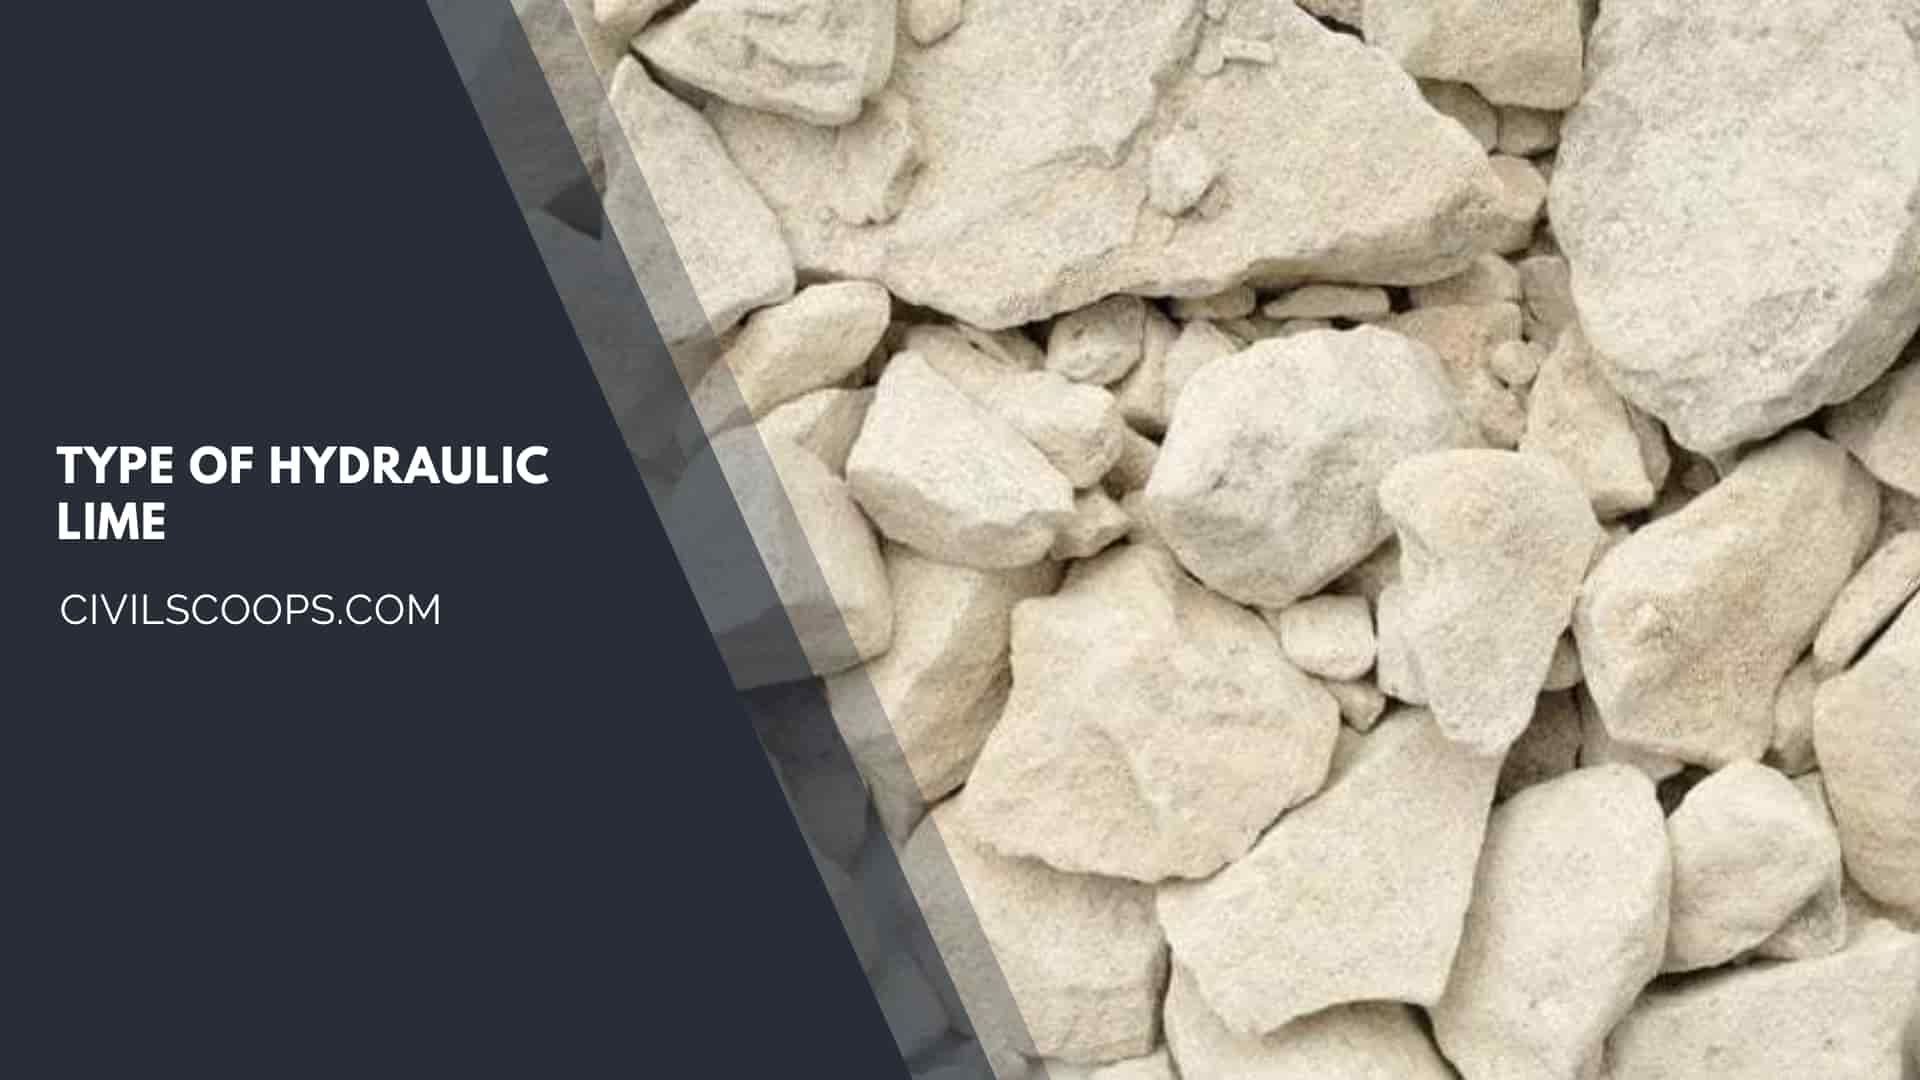 Type of Hydraulic Lime